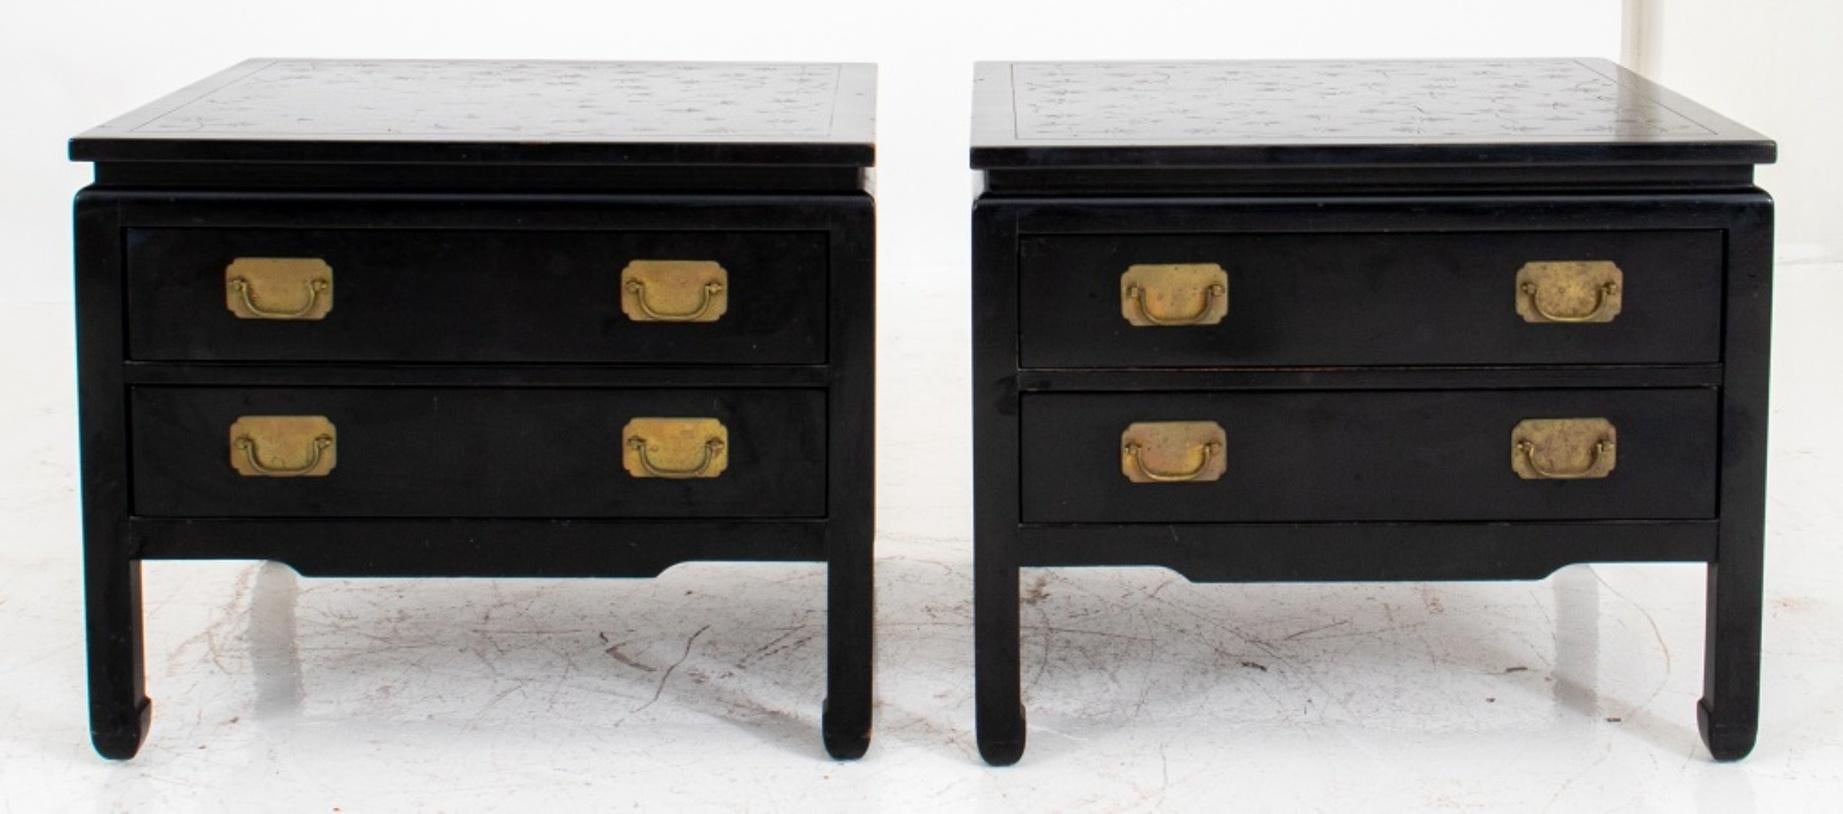 Pair of Kittinger Asian modern lamp tables, with etched floral pattern to the surface of the table, comprising of two drawers with brass pulls, stamped with maker's mark to inside of drawer. 23